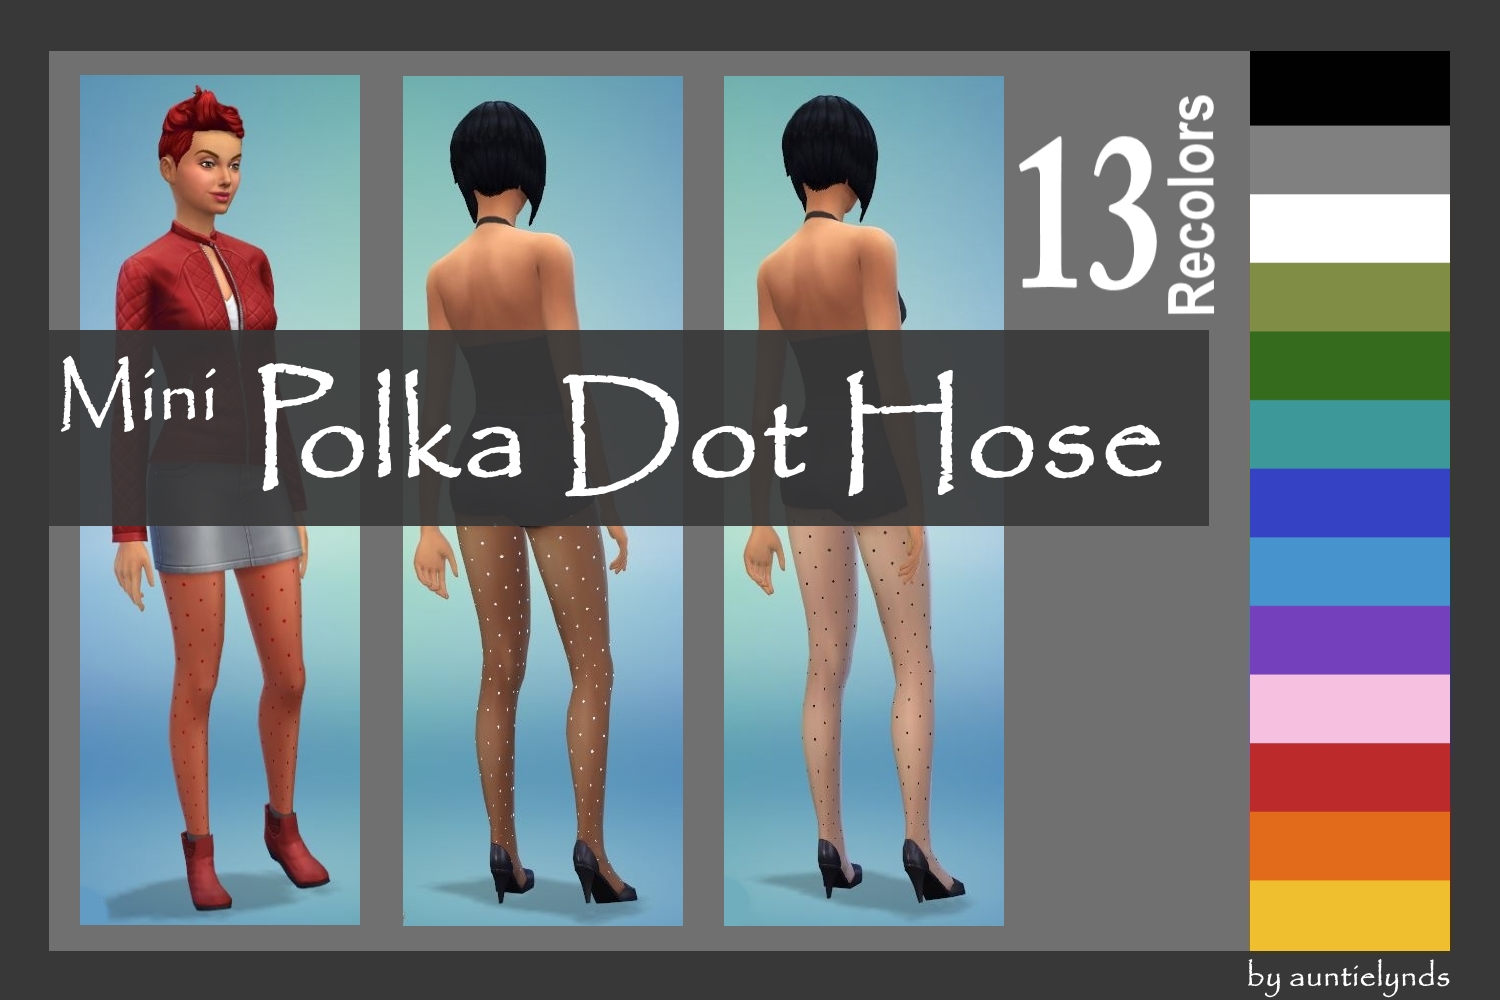 http://thumbs.modthesims2.com/img/3/4/1/4/1/8/7/MTS_auntielynds-1485103-PolkaDotsCover.jpg